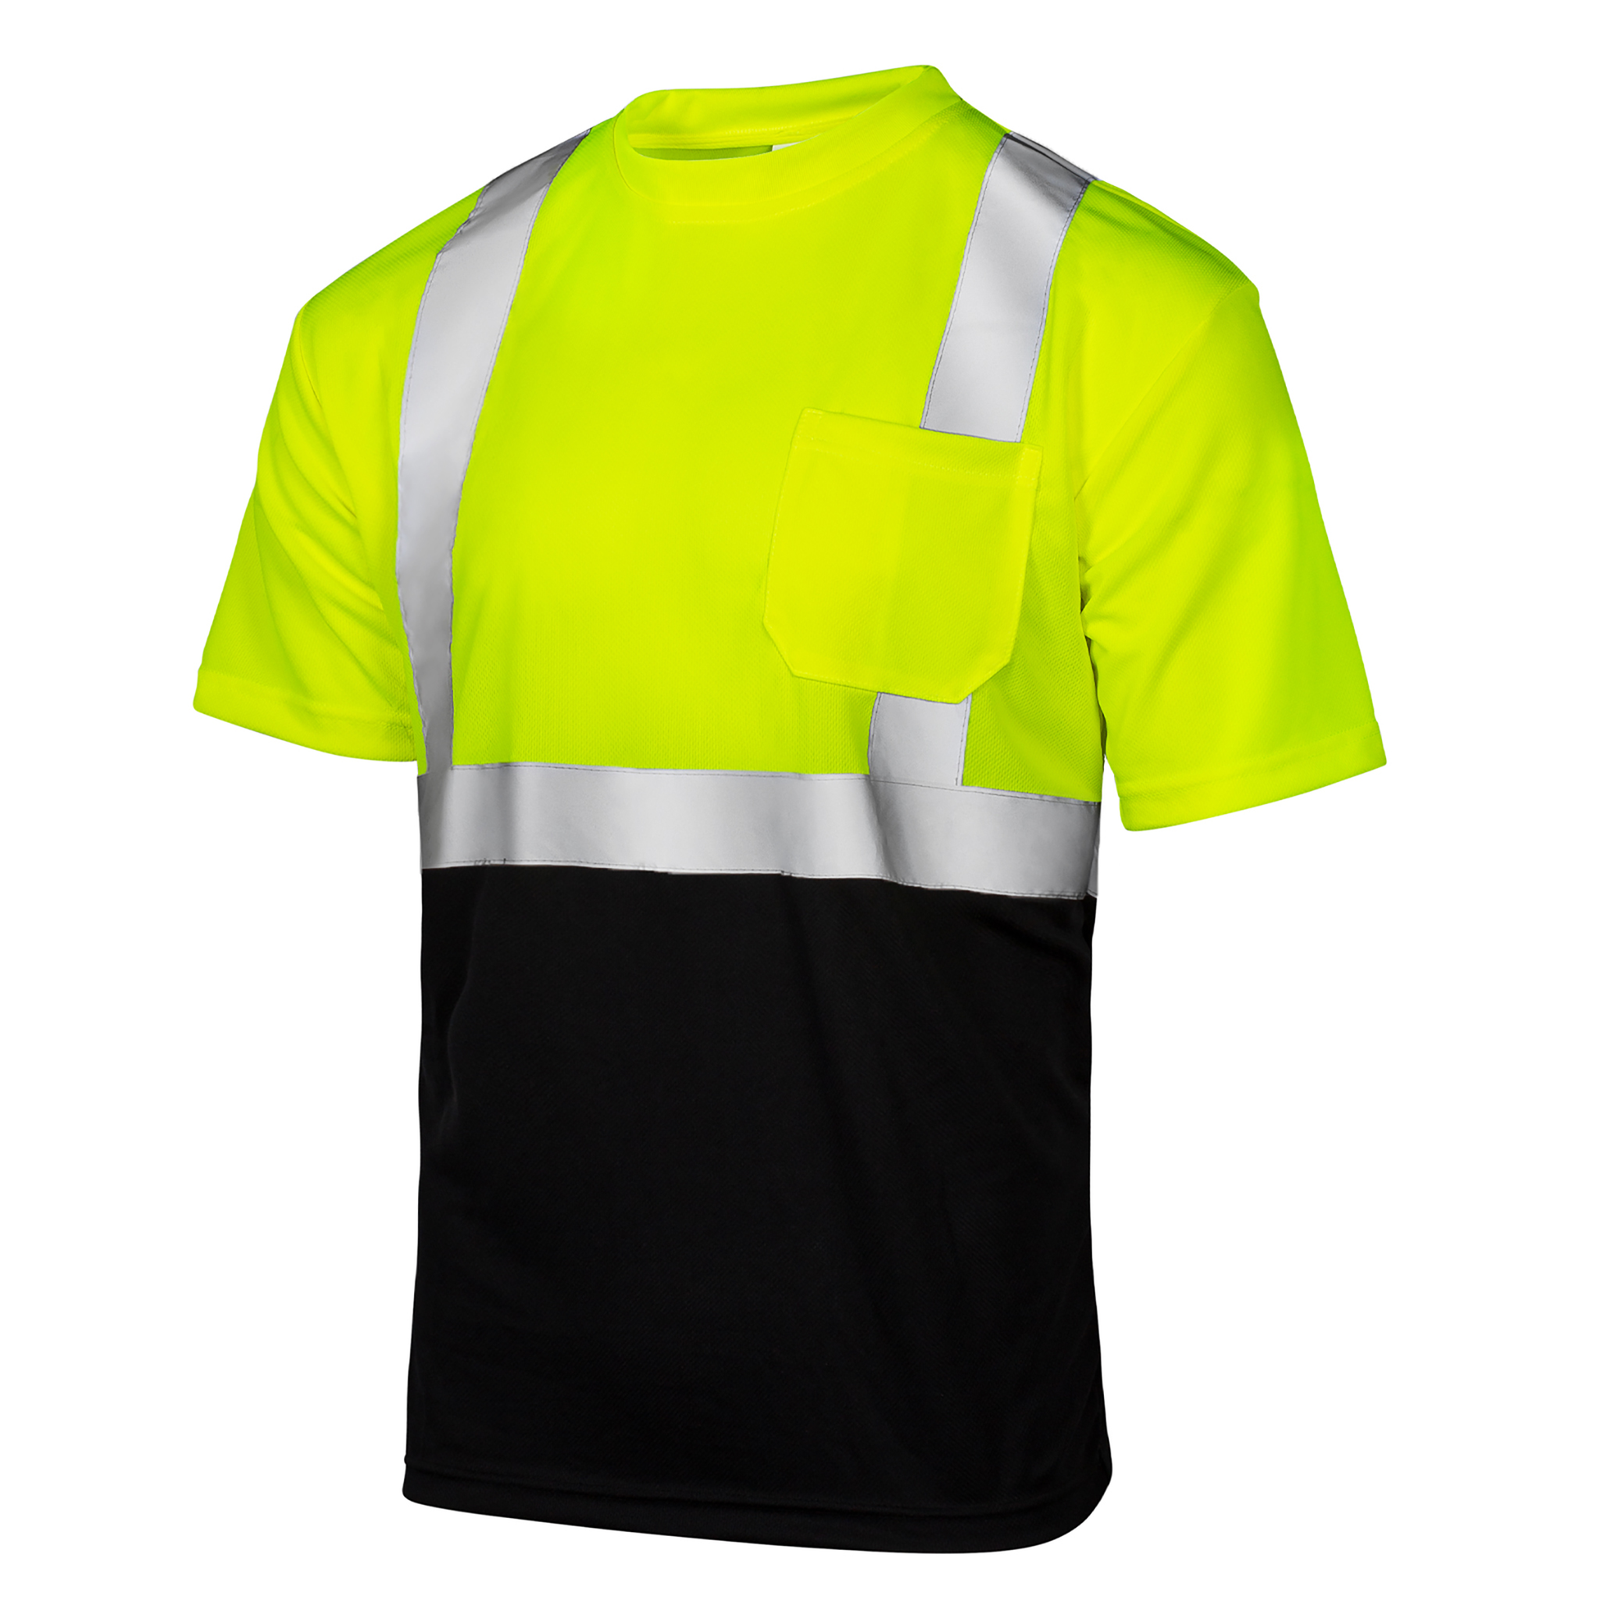 Yellow and black ANSI Class 2 type R safety shirt with reflective strips 